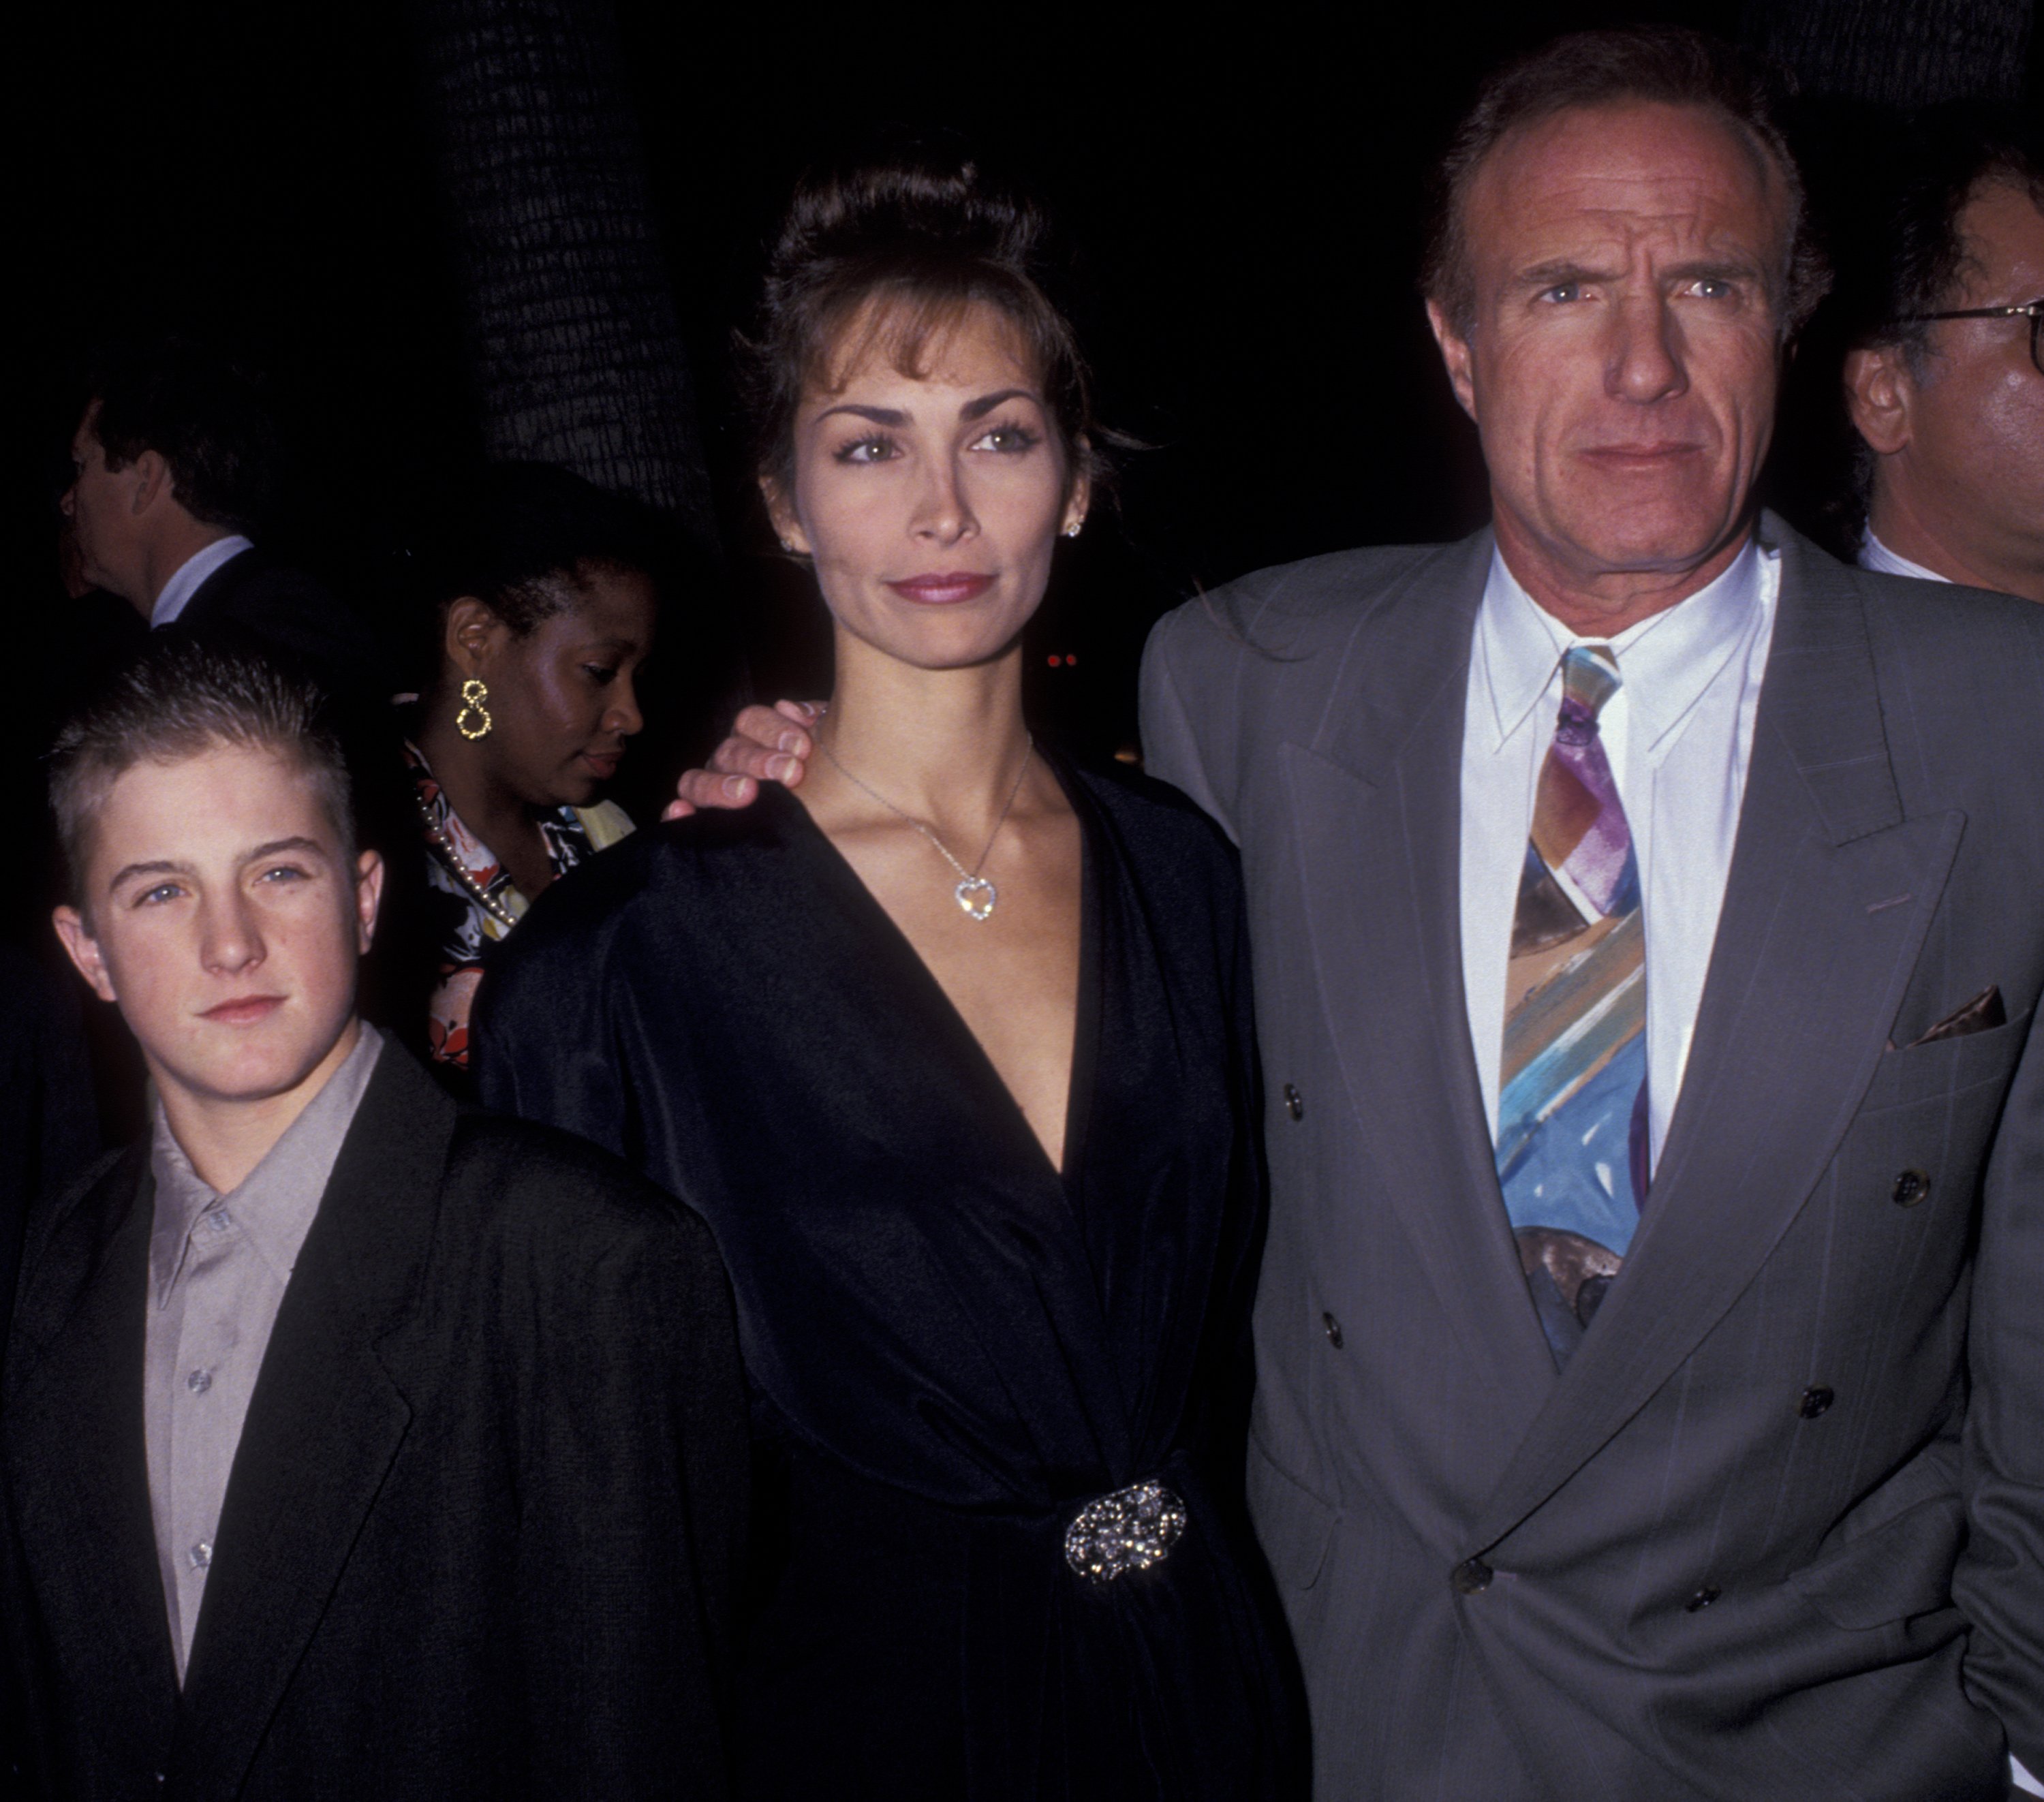 Scott Caan, Ingrid Hajek, and James Caan at the premiere of "For The Boys" on November 14, 1991, in Beverly Hills, California. | Source: Getty Images